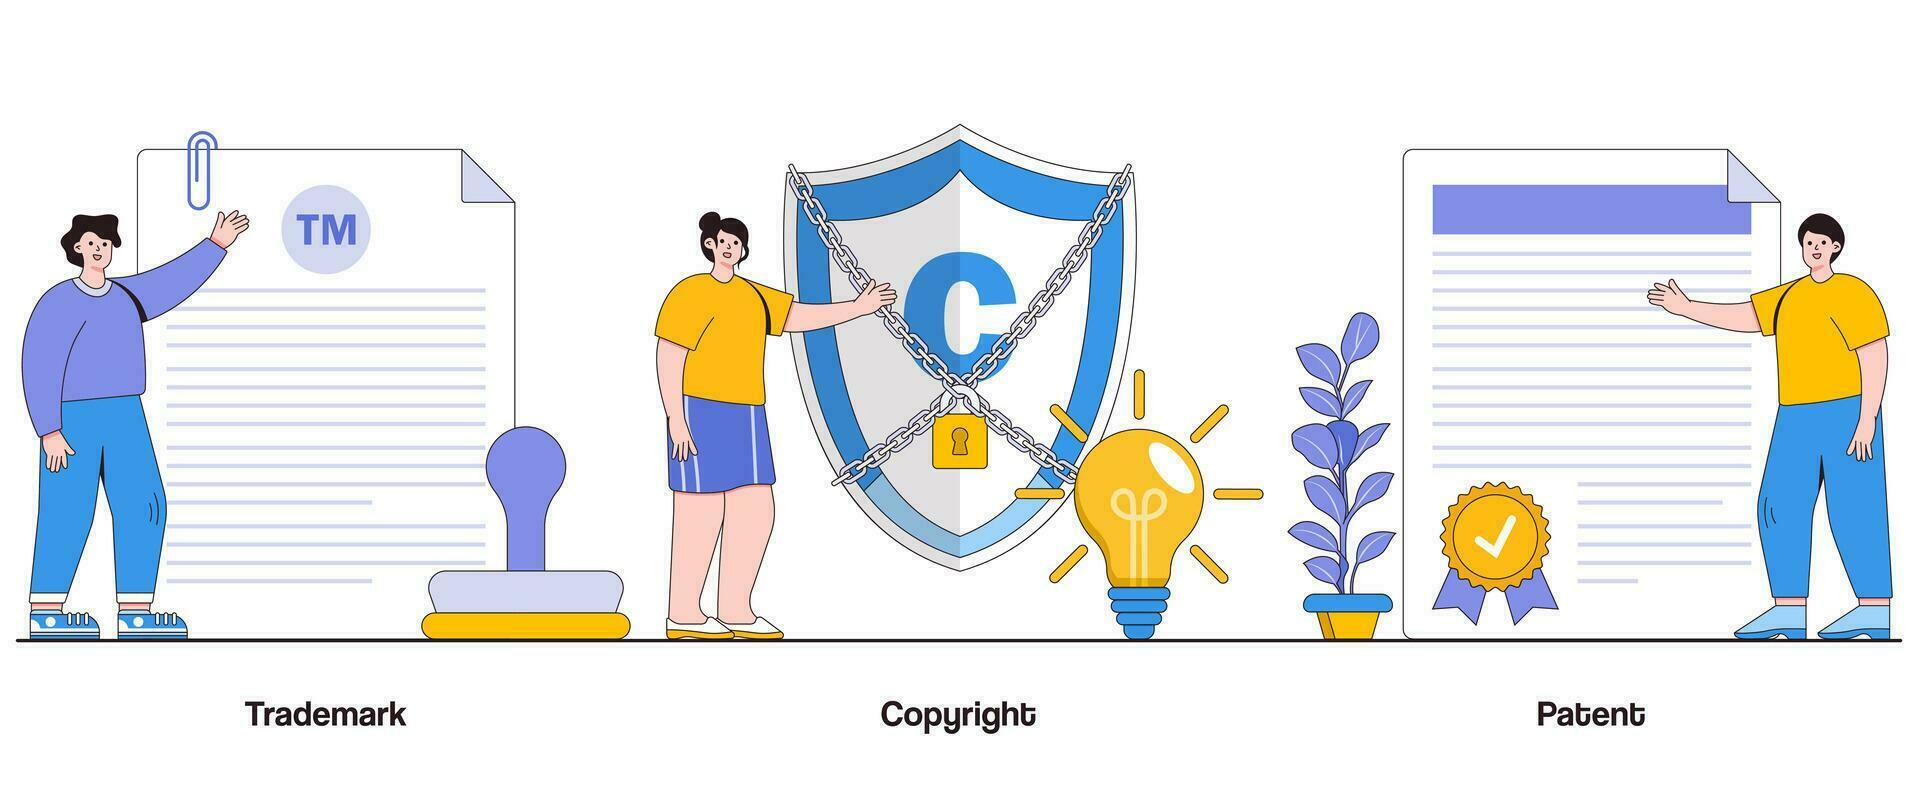 Trademark, Copyright, and Patent Concept with Character. Intellectual Property Abstract Vector Illustration Set. Innovation, Creativity, and Protection Metaphor